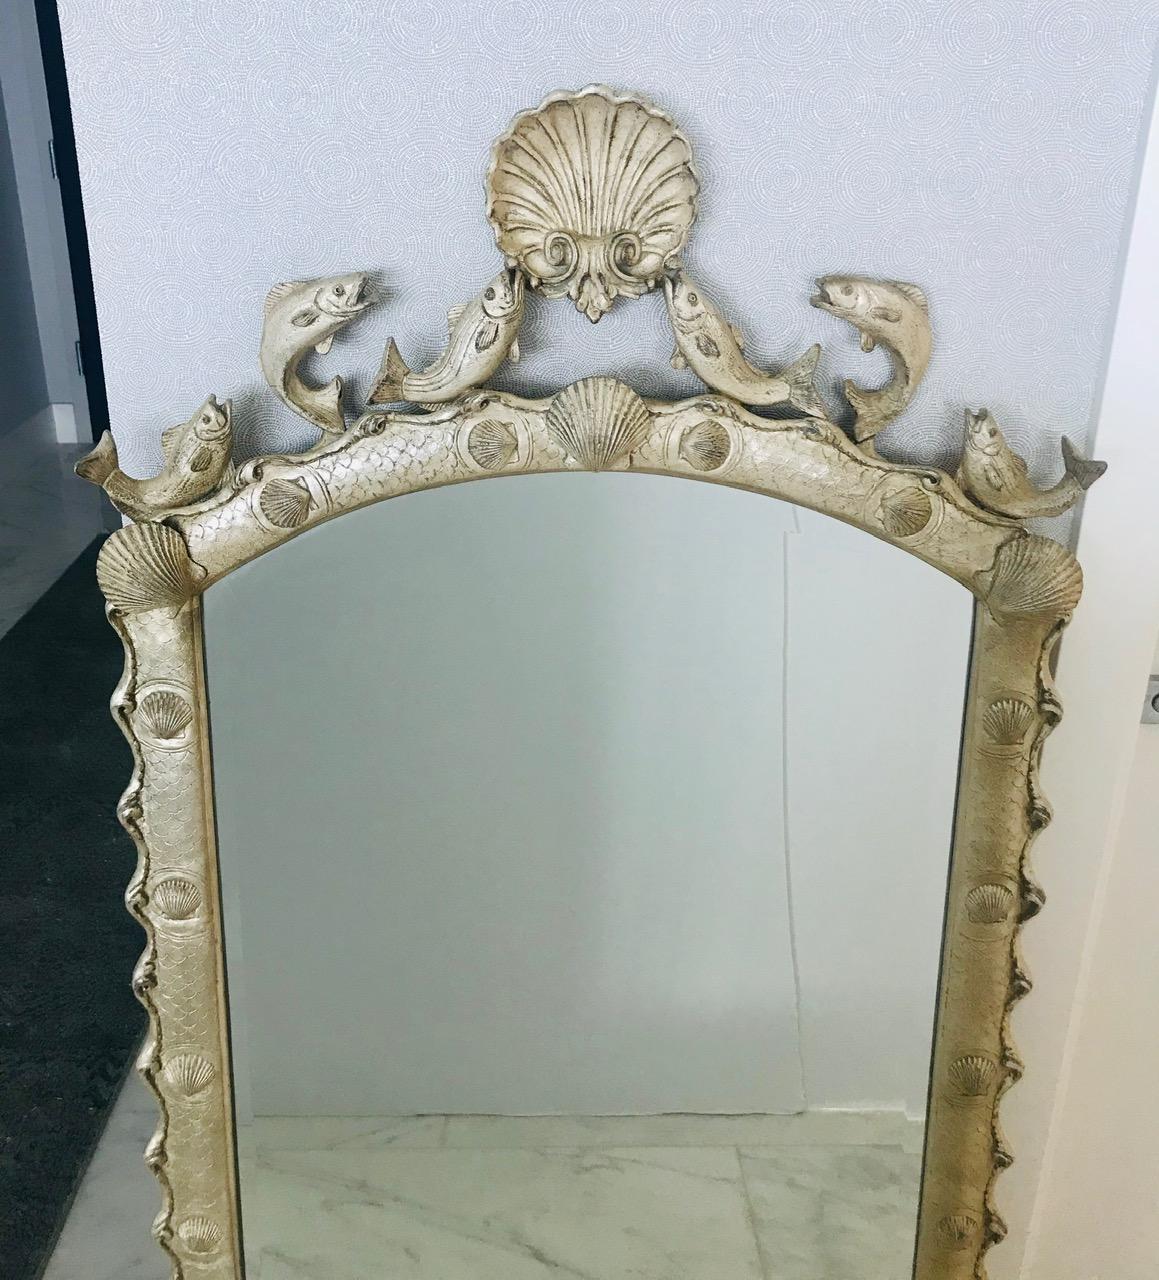 Late 20th Century Exquisite Hollywood Regency Scalloped Mirror in Antique Sterling Silver Leaf